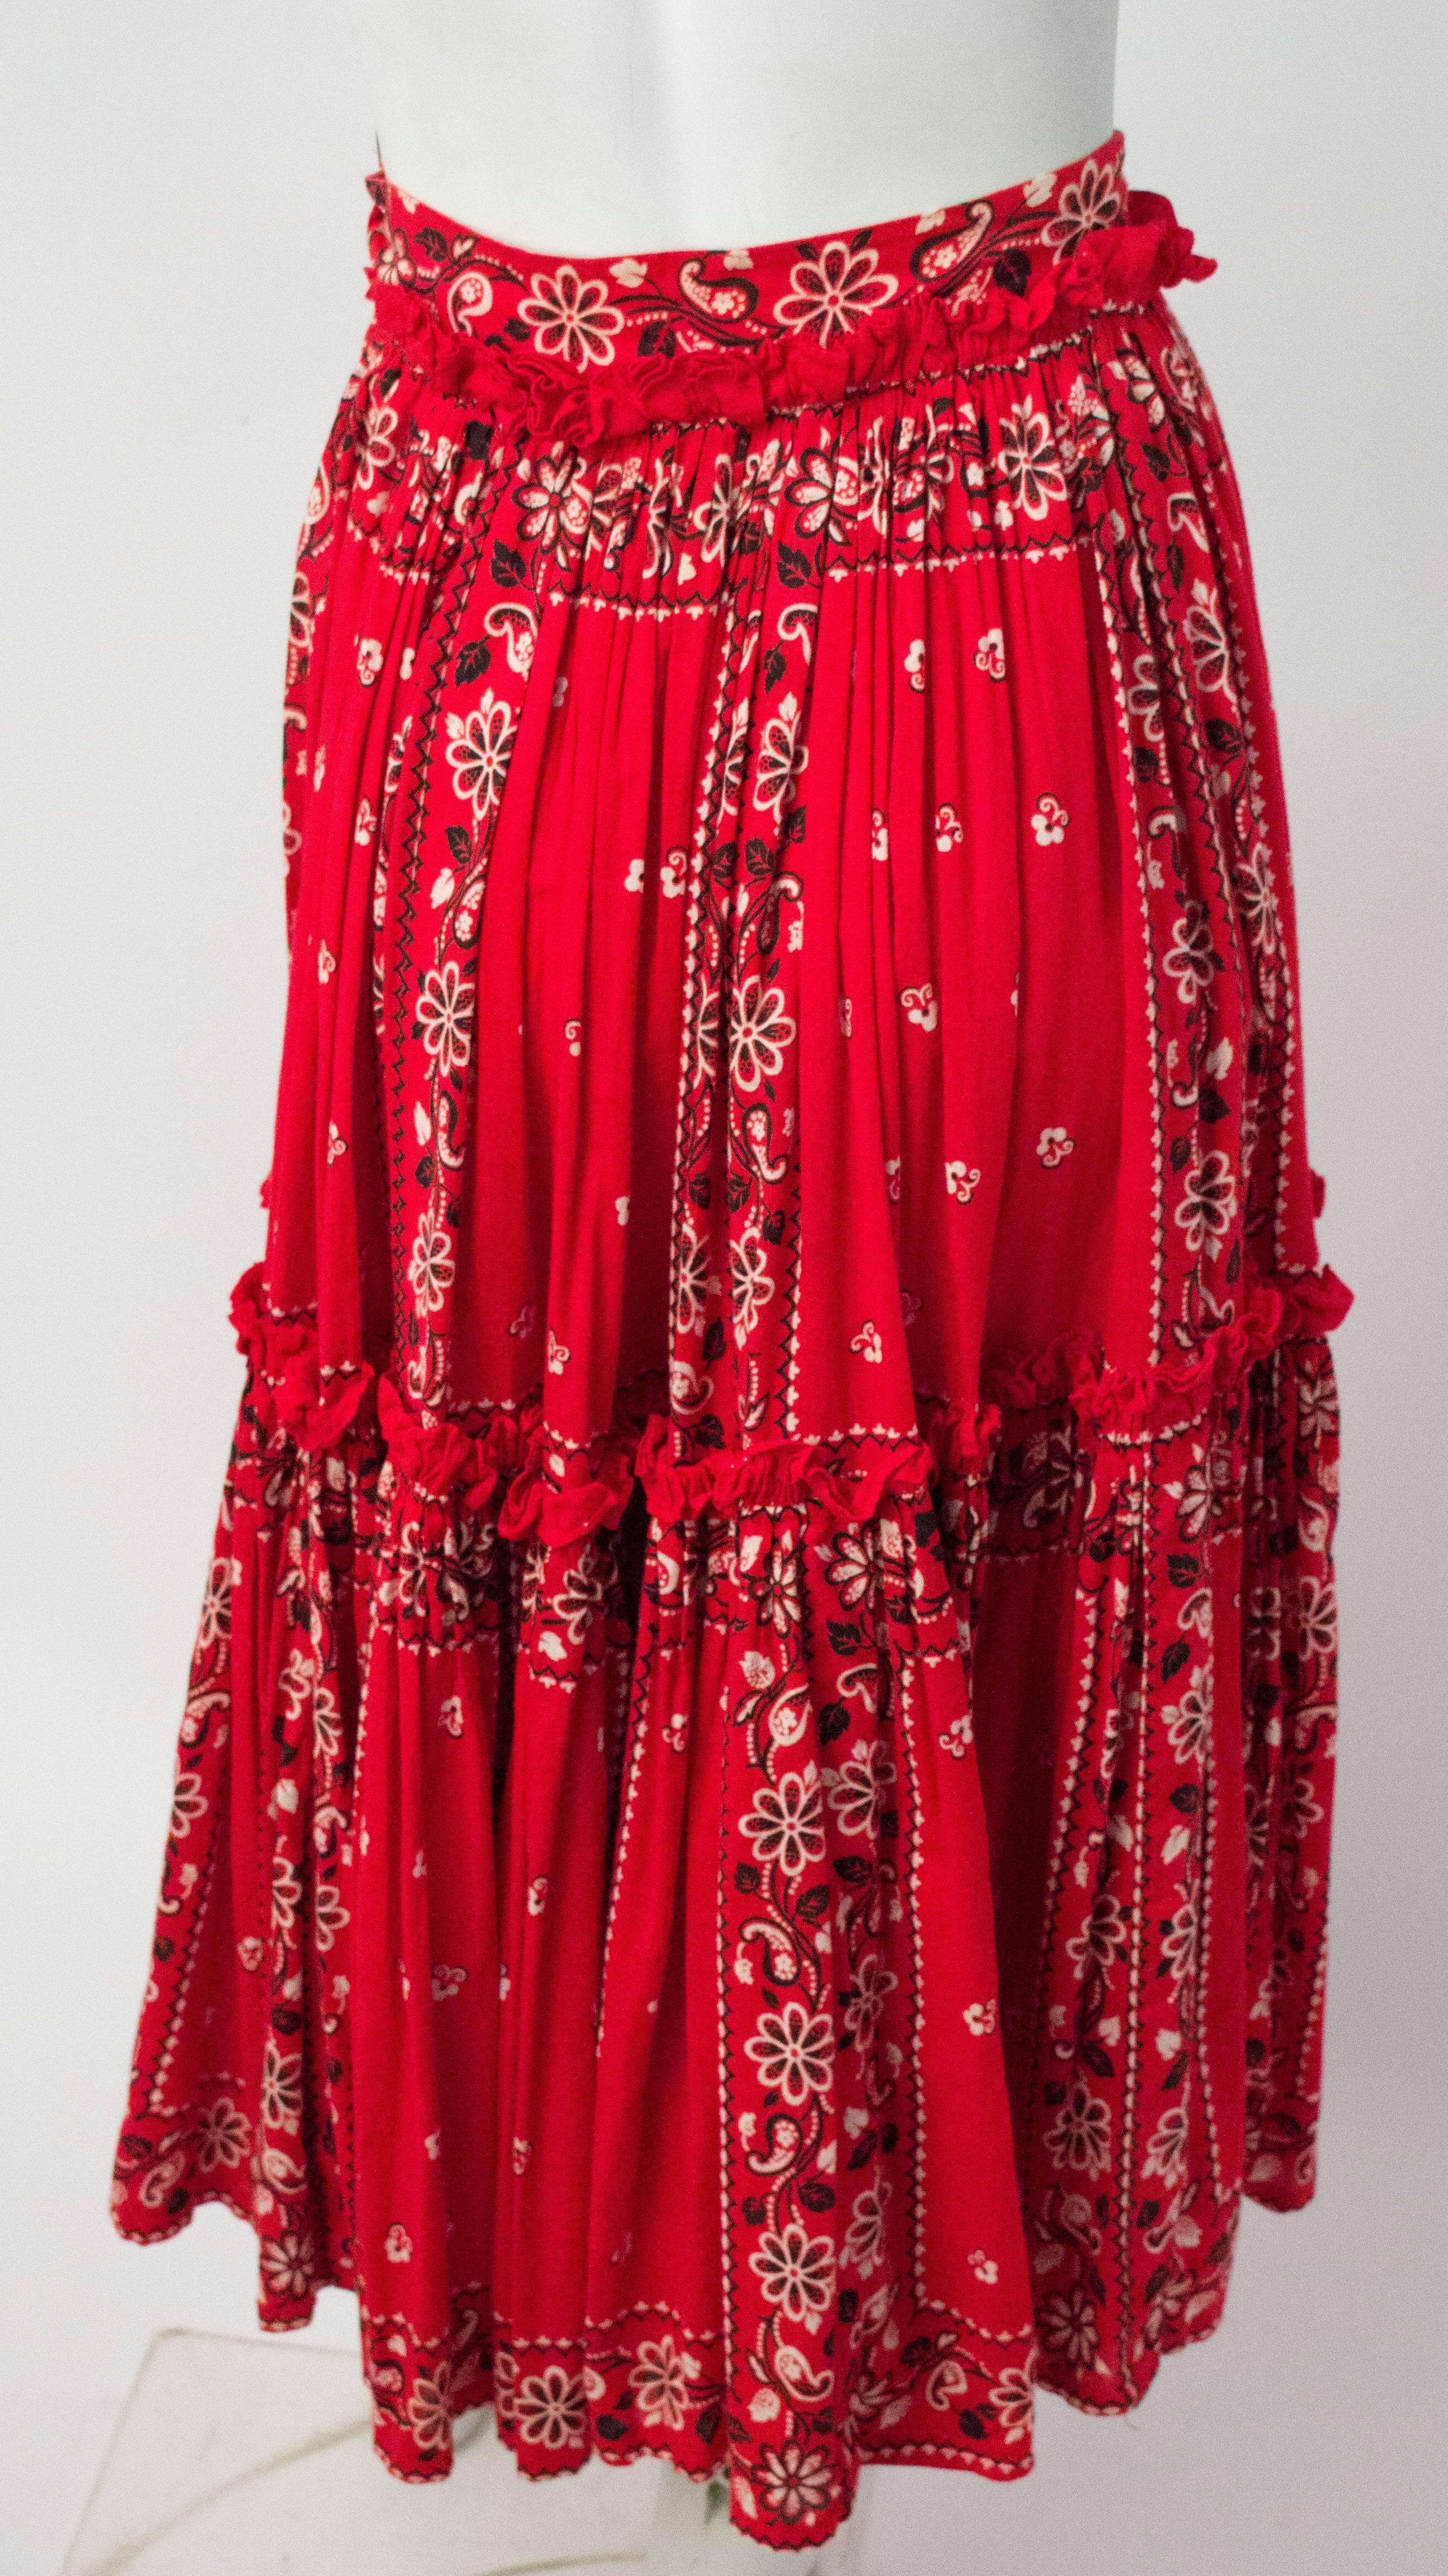 50s Red Paisley Print Western Skirt. Side metal zipper.
Cotton, unlined. 